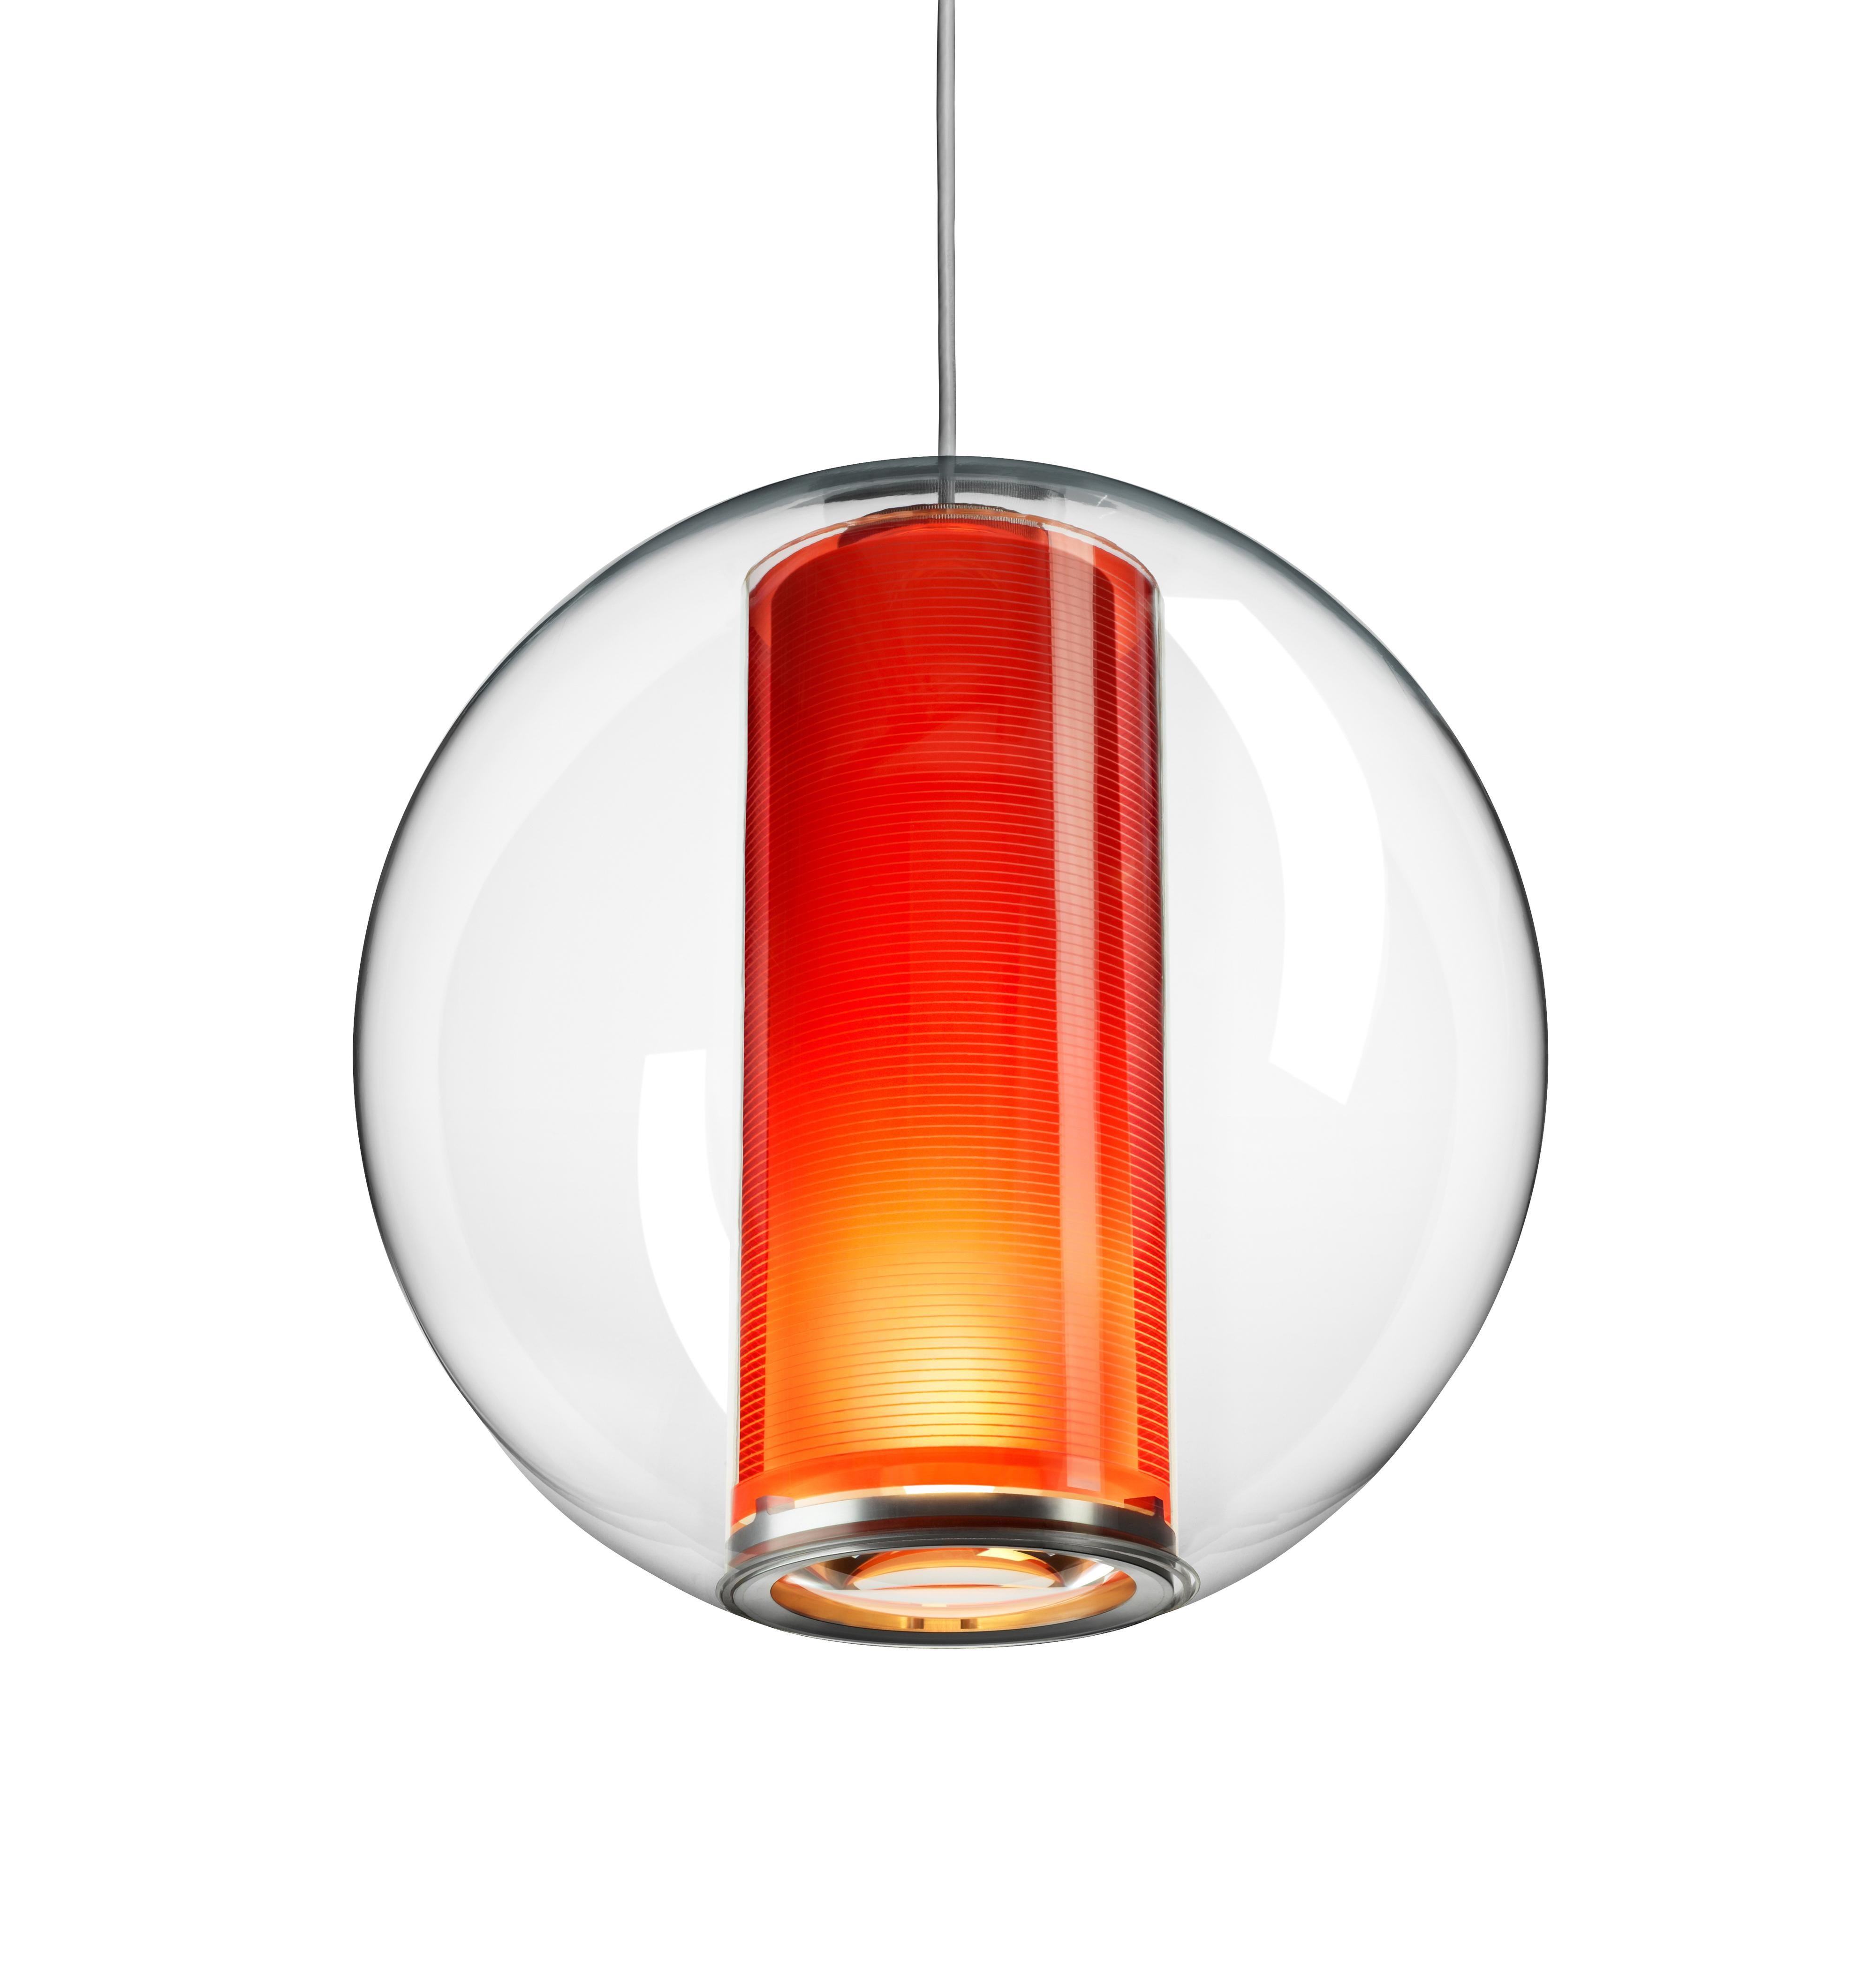 Bel Occhio pendant is a study in weightlessness and transparency. Its inner column suspends freely within a clear acrylic shell and provides both ambient and focused illumination. Available with orange or white diffuser.

Features:
Full range